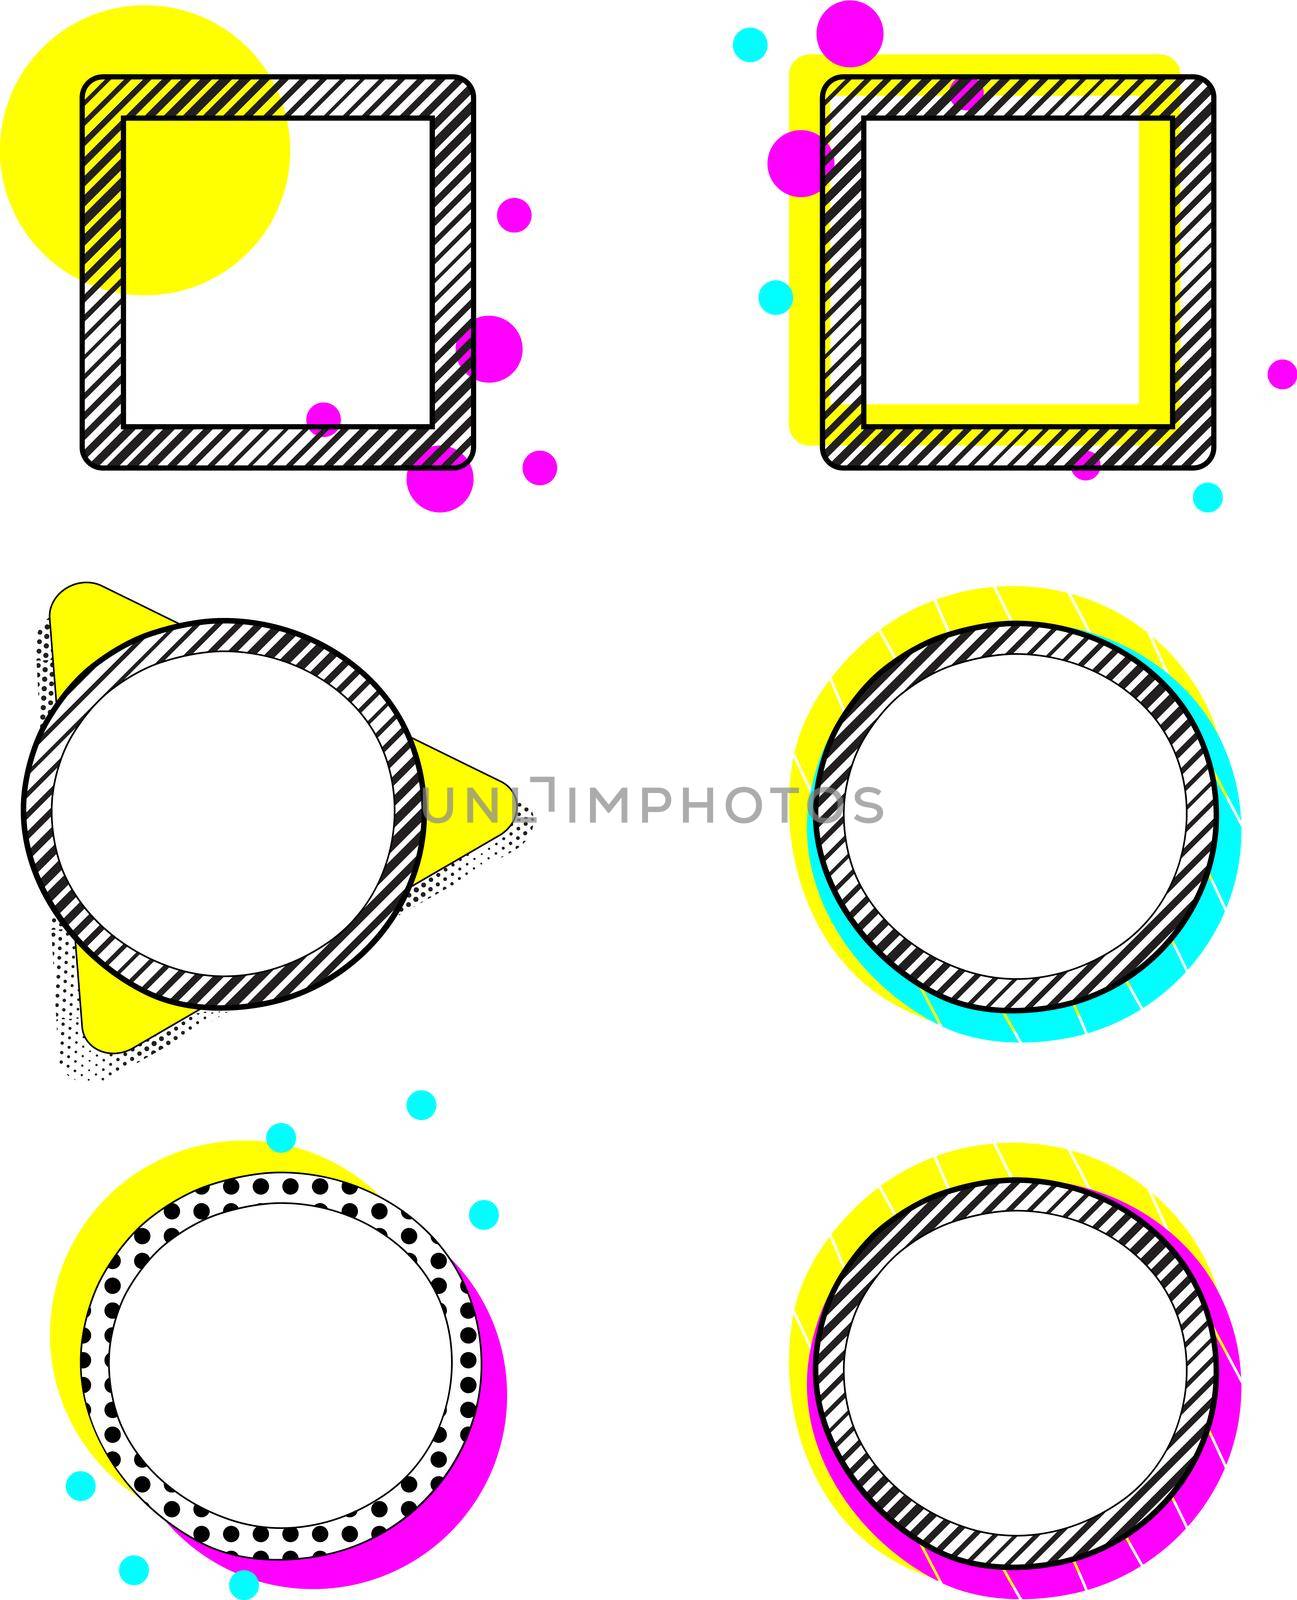 80s Colorful Neon Geometric Frame Elements by apollocat